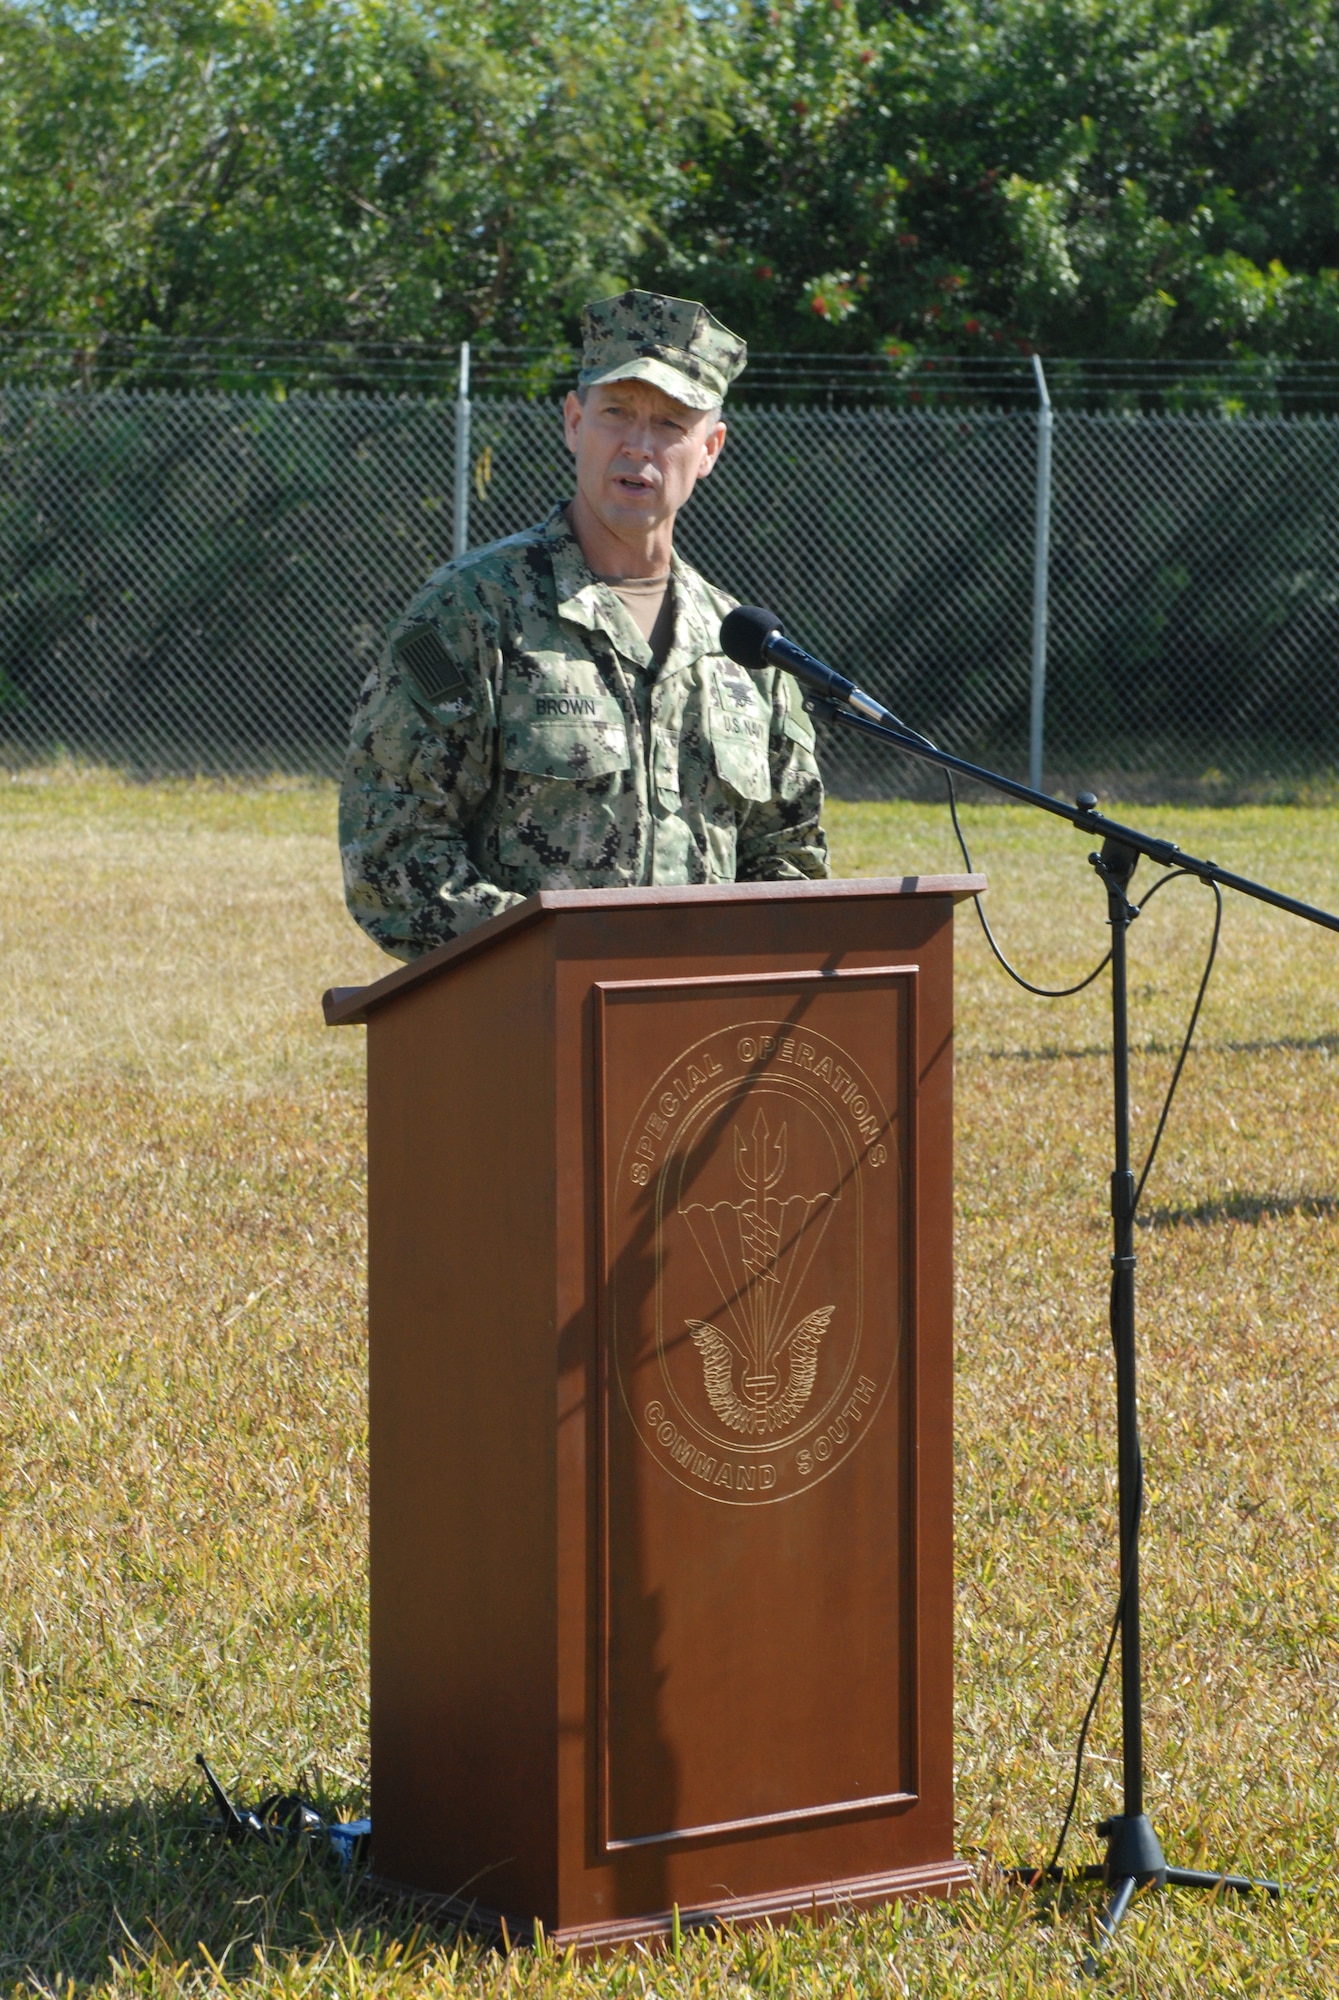 Navy Rear Adm. Thomas L. Brown II, commander of Special Operations Command South, speaks to Miami-Dade County, city of Homestead officials, and fellow service members during the ground breaking ceremony for the new SOCSOUTH headquarters building Jan 10., at Homestead Air Reserve Base, Fla. The new 125,000-square foot, $41 million headquarters facility will be designed to host more than 400 people representing all branches of the armed forces. The new facility will be LEED-certified and is expected to be completed in three years. (Department of Defense photo by Army Sgt. 1st Class Alex Licea, SOCSOUTH Public Affairs)